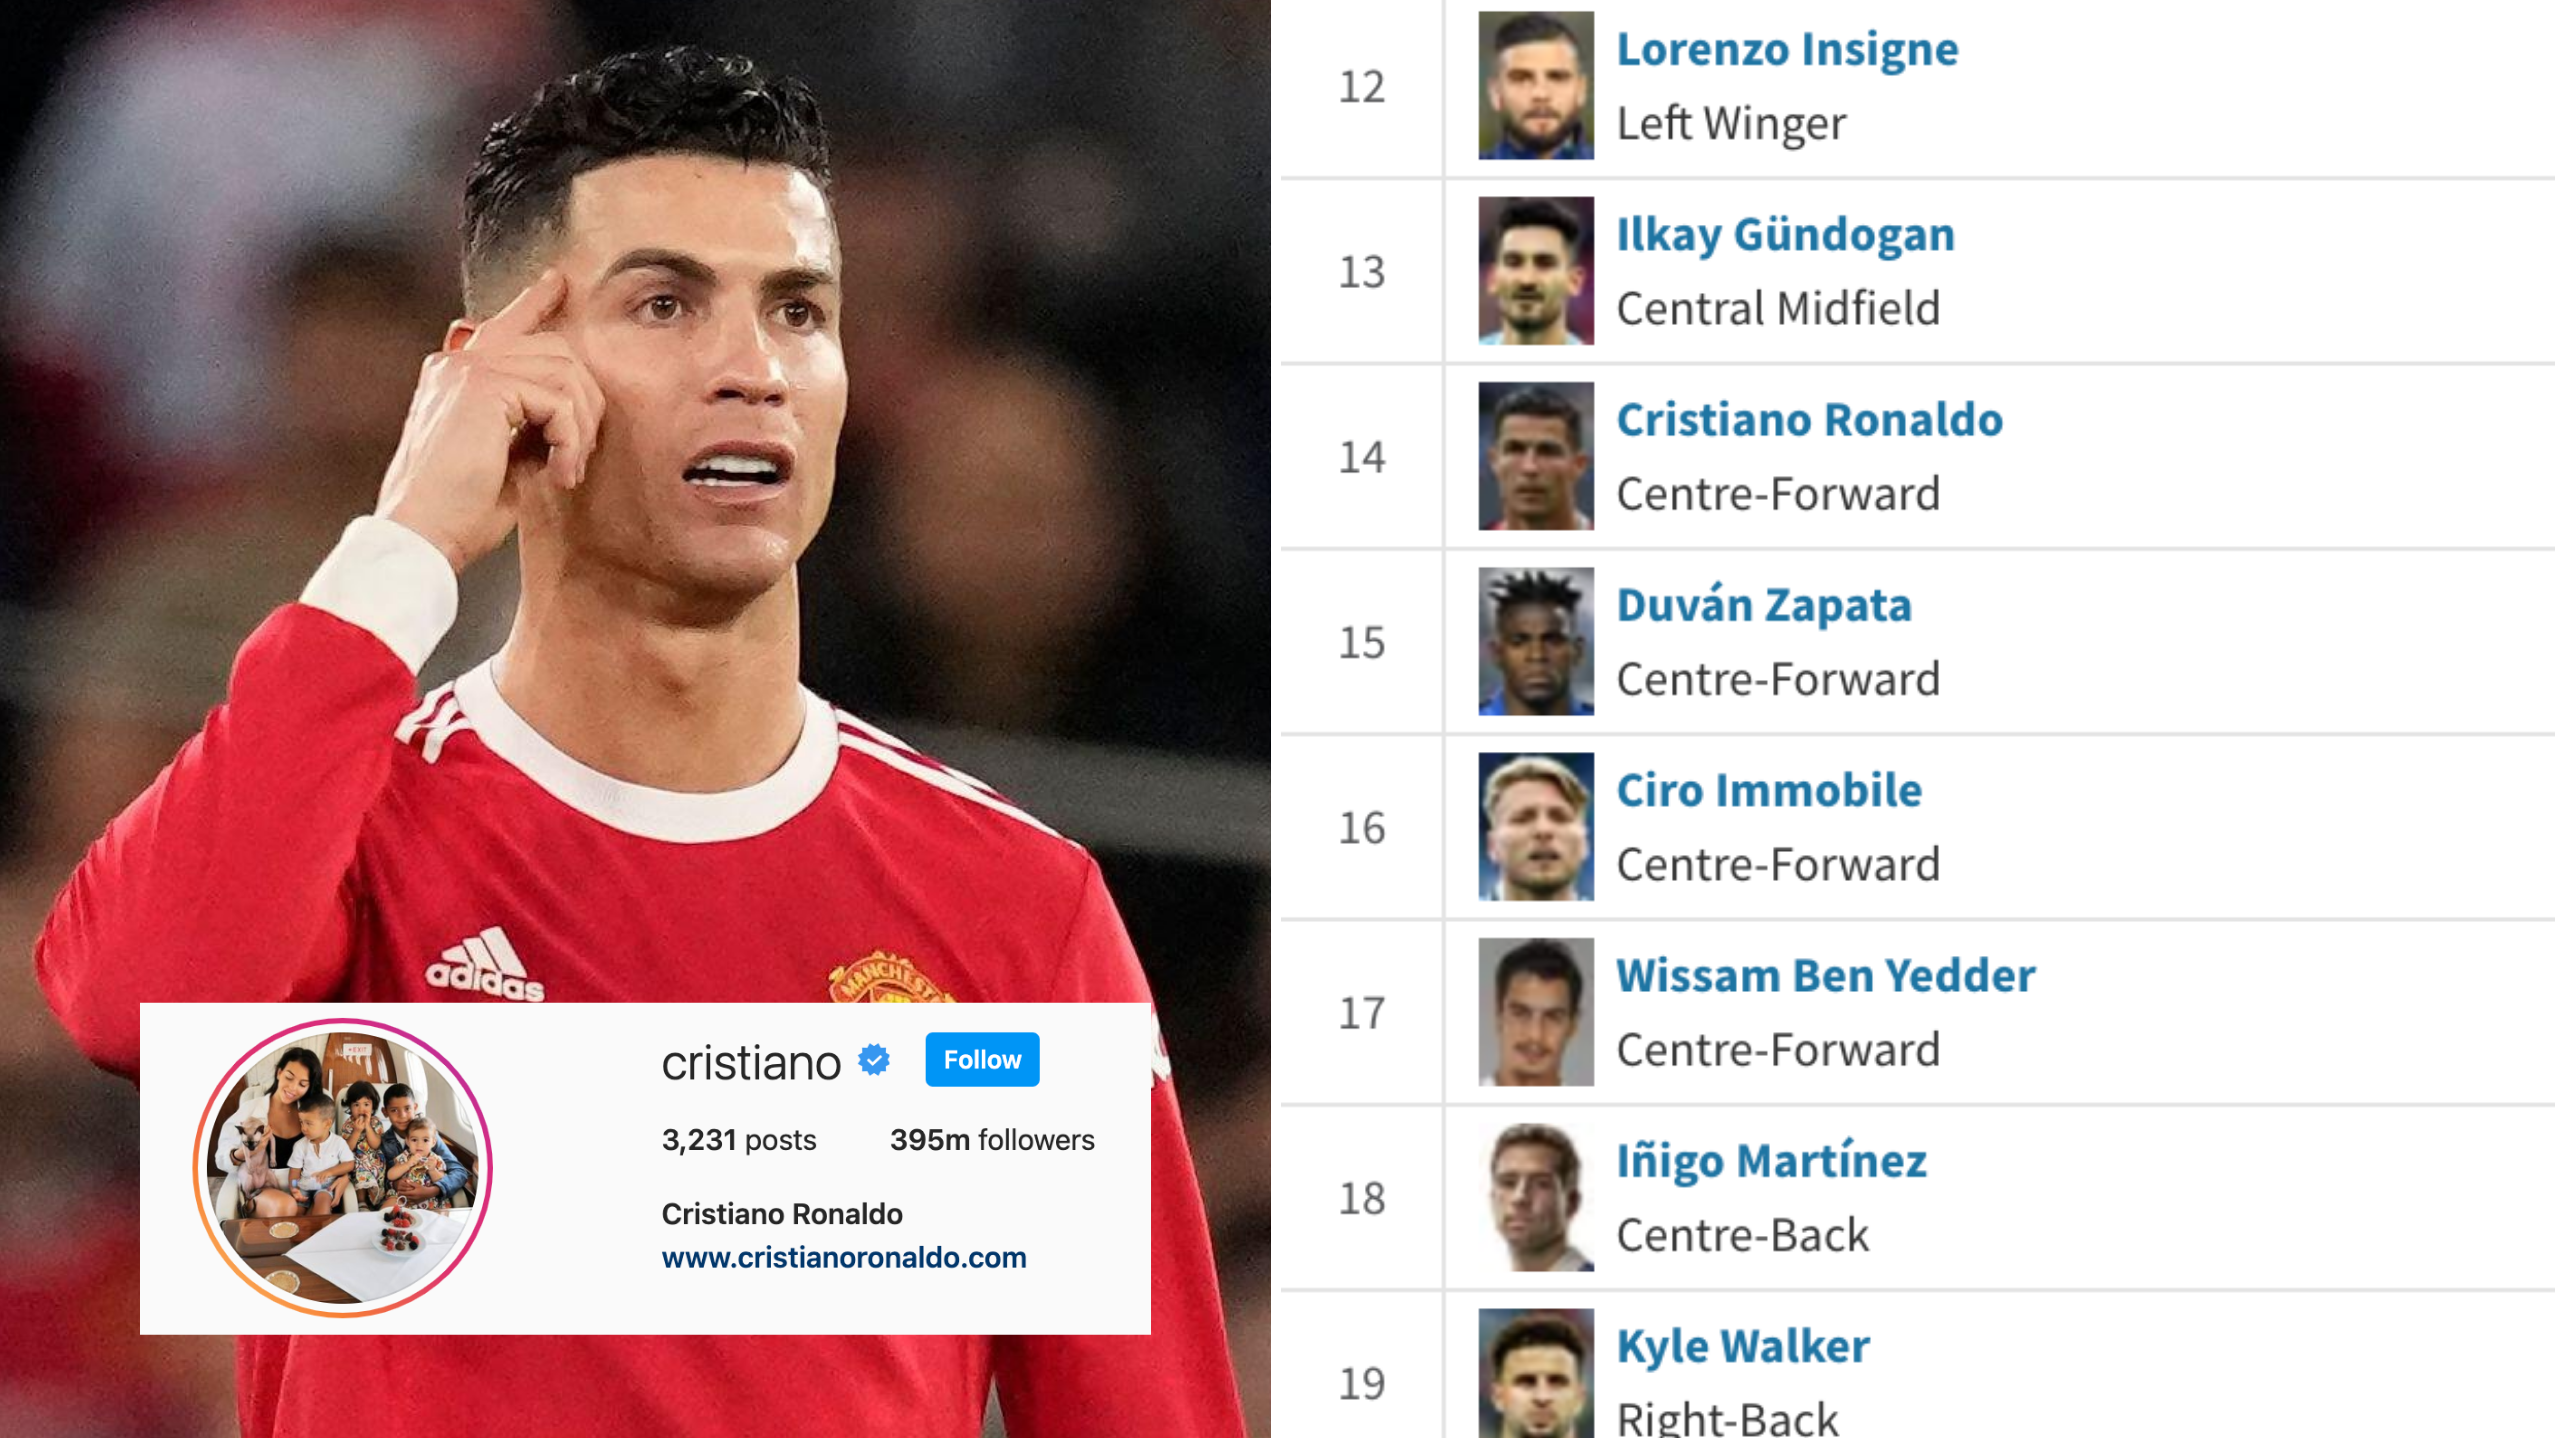 Ronaldo's price on Transfermarkt has dropped significantly